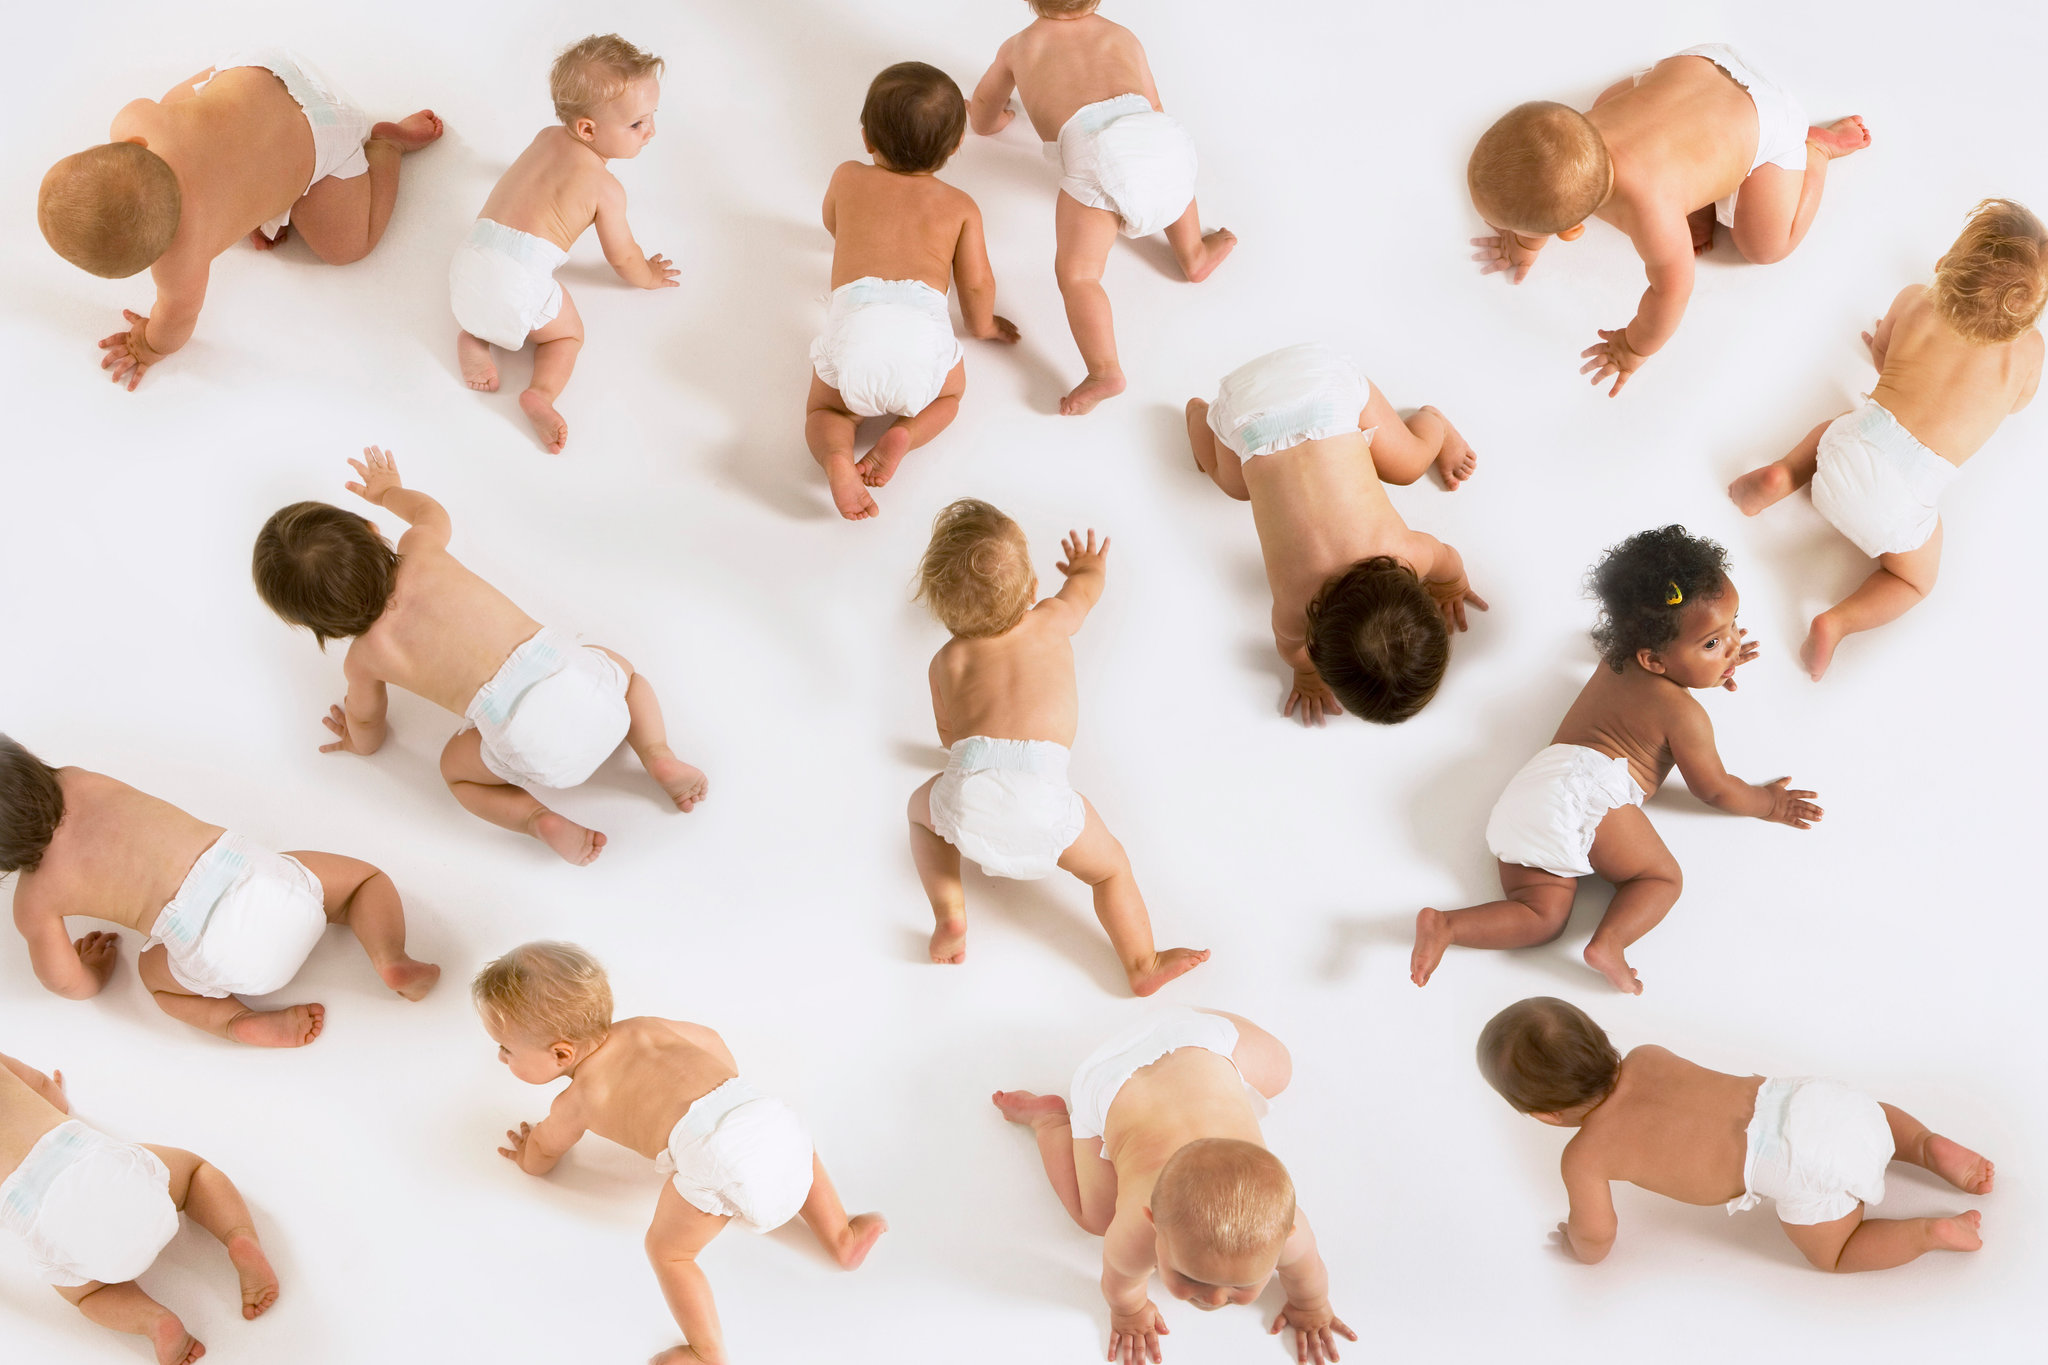 100 Uncommon Baby Names To Help Your Child Stand Out From The Crowd